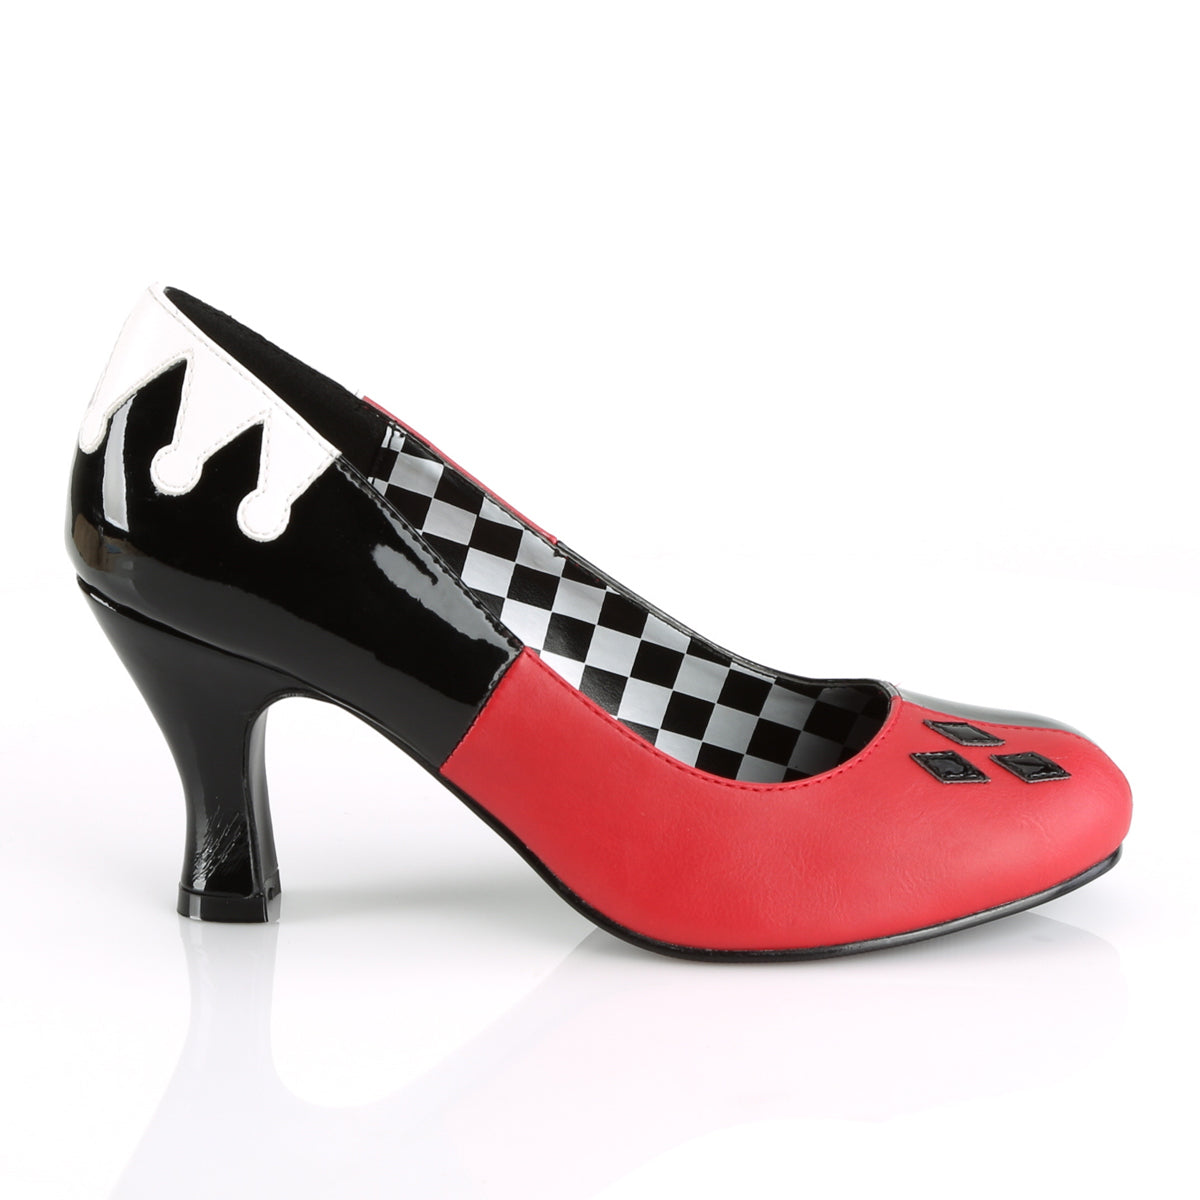 HARLEY-42 3" Heel Black and Red Women's Costume Shoes Funtasma Costume Shoes Fancy Dress